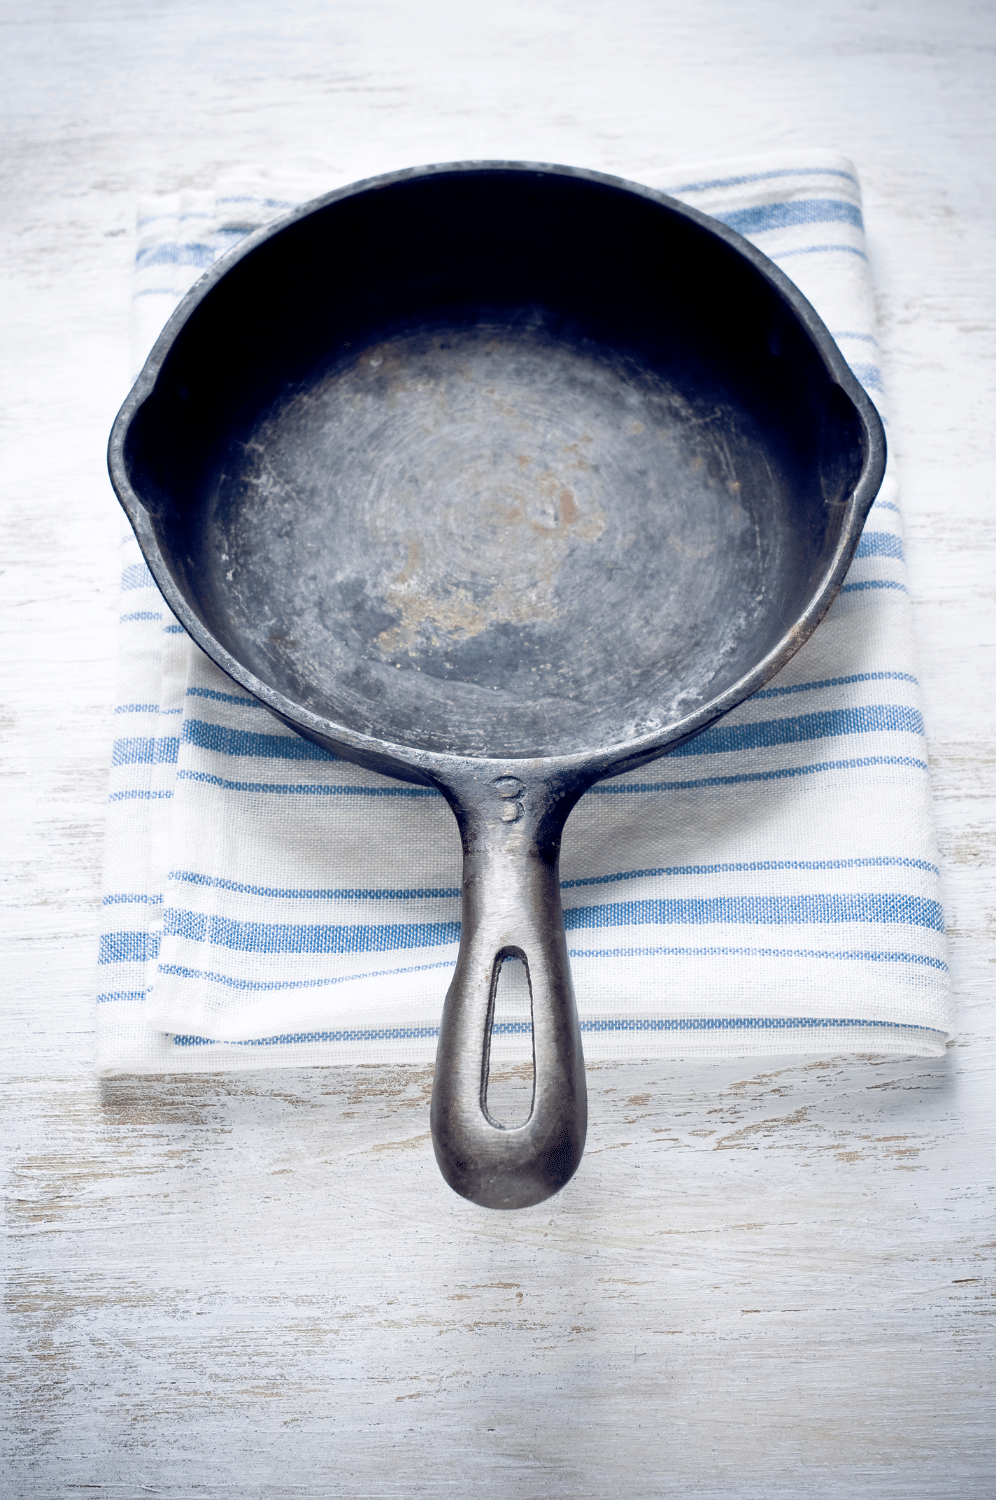 Small In Size, Big On Results: Choosing The Right Mini Cast Iron Skillet